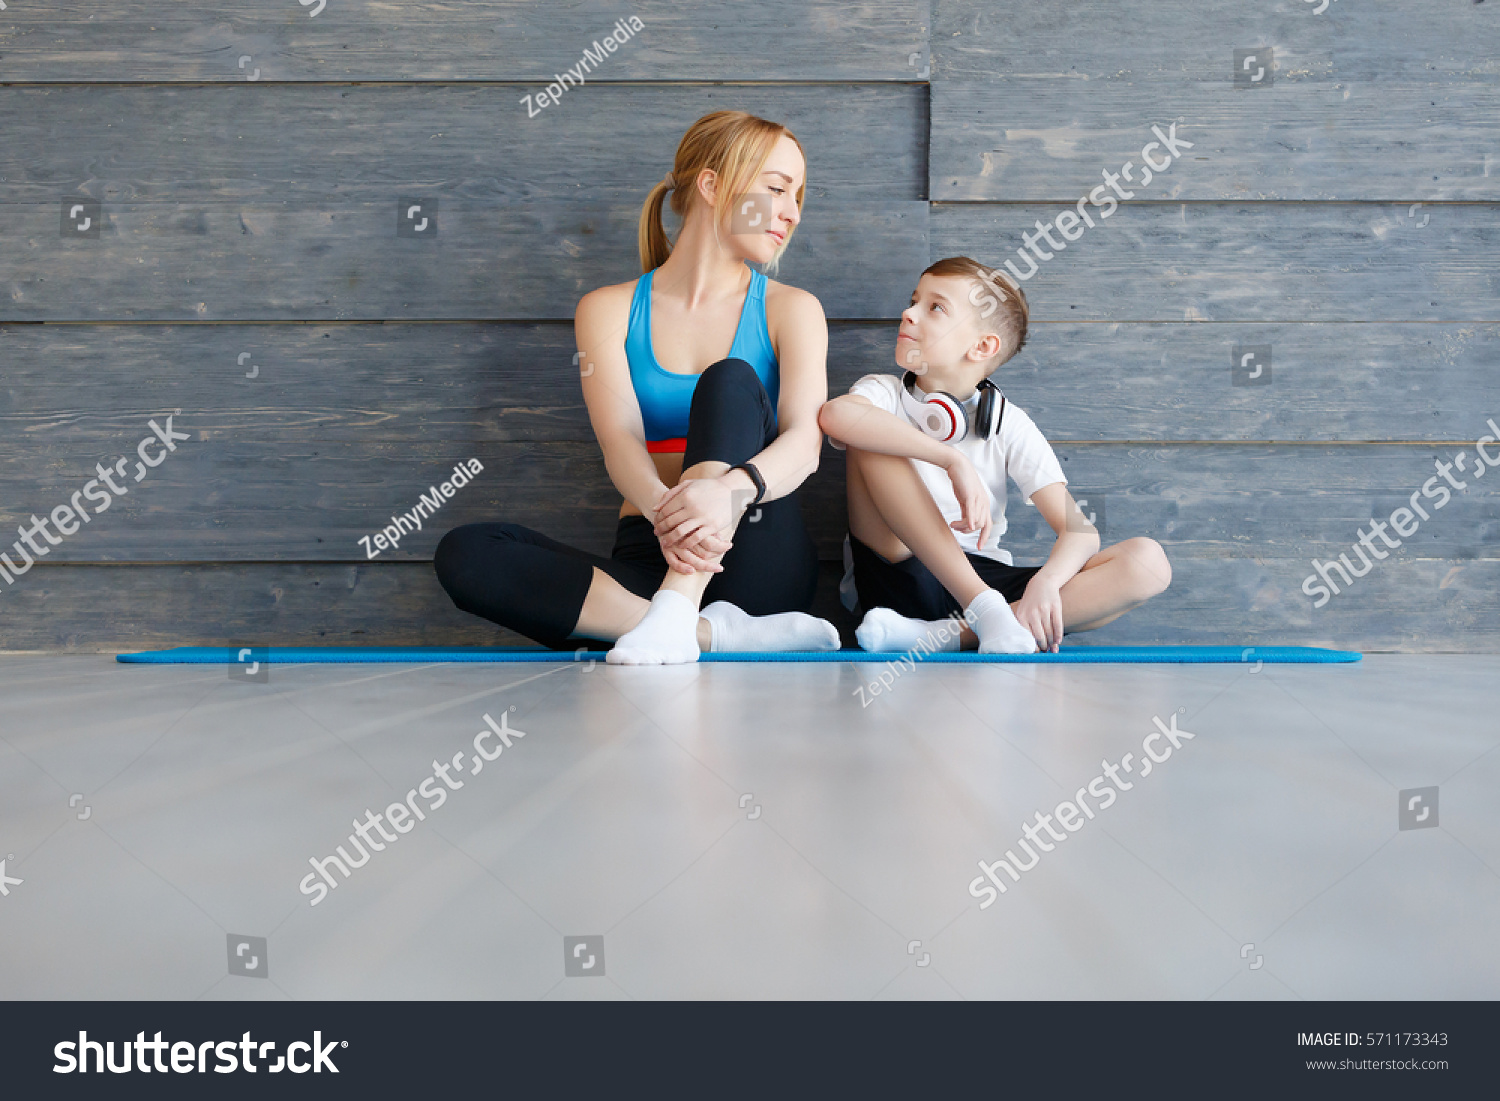 Fitness mother with her 9 years old son. Sports mom with kid relaxing after morning work-out at home. Mum and child do the exercises together, healthy family lifestyle concept #571173343